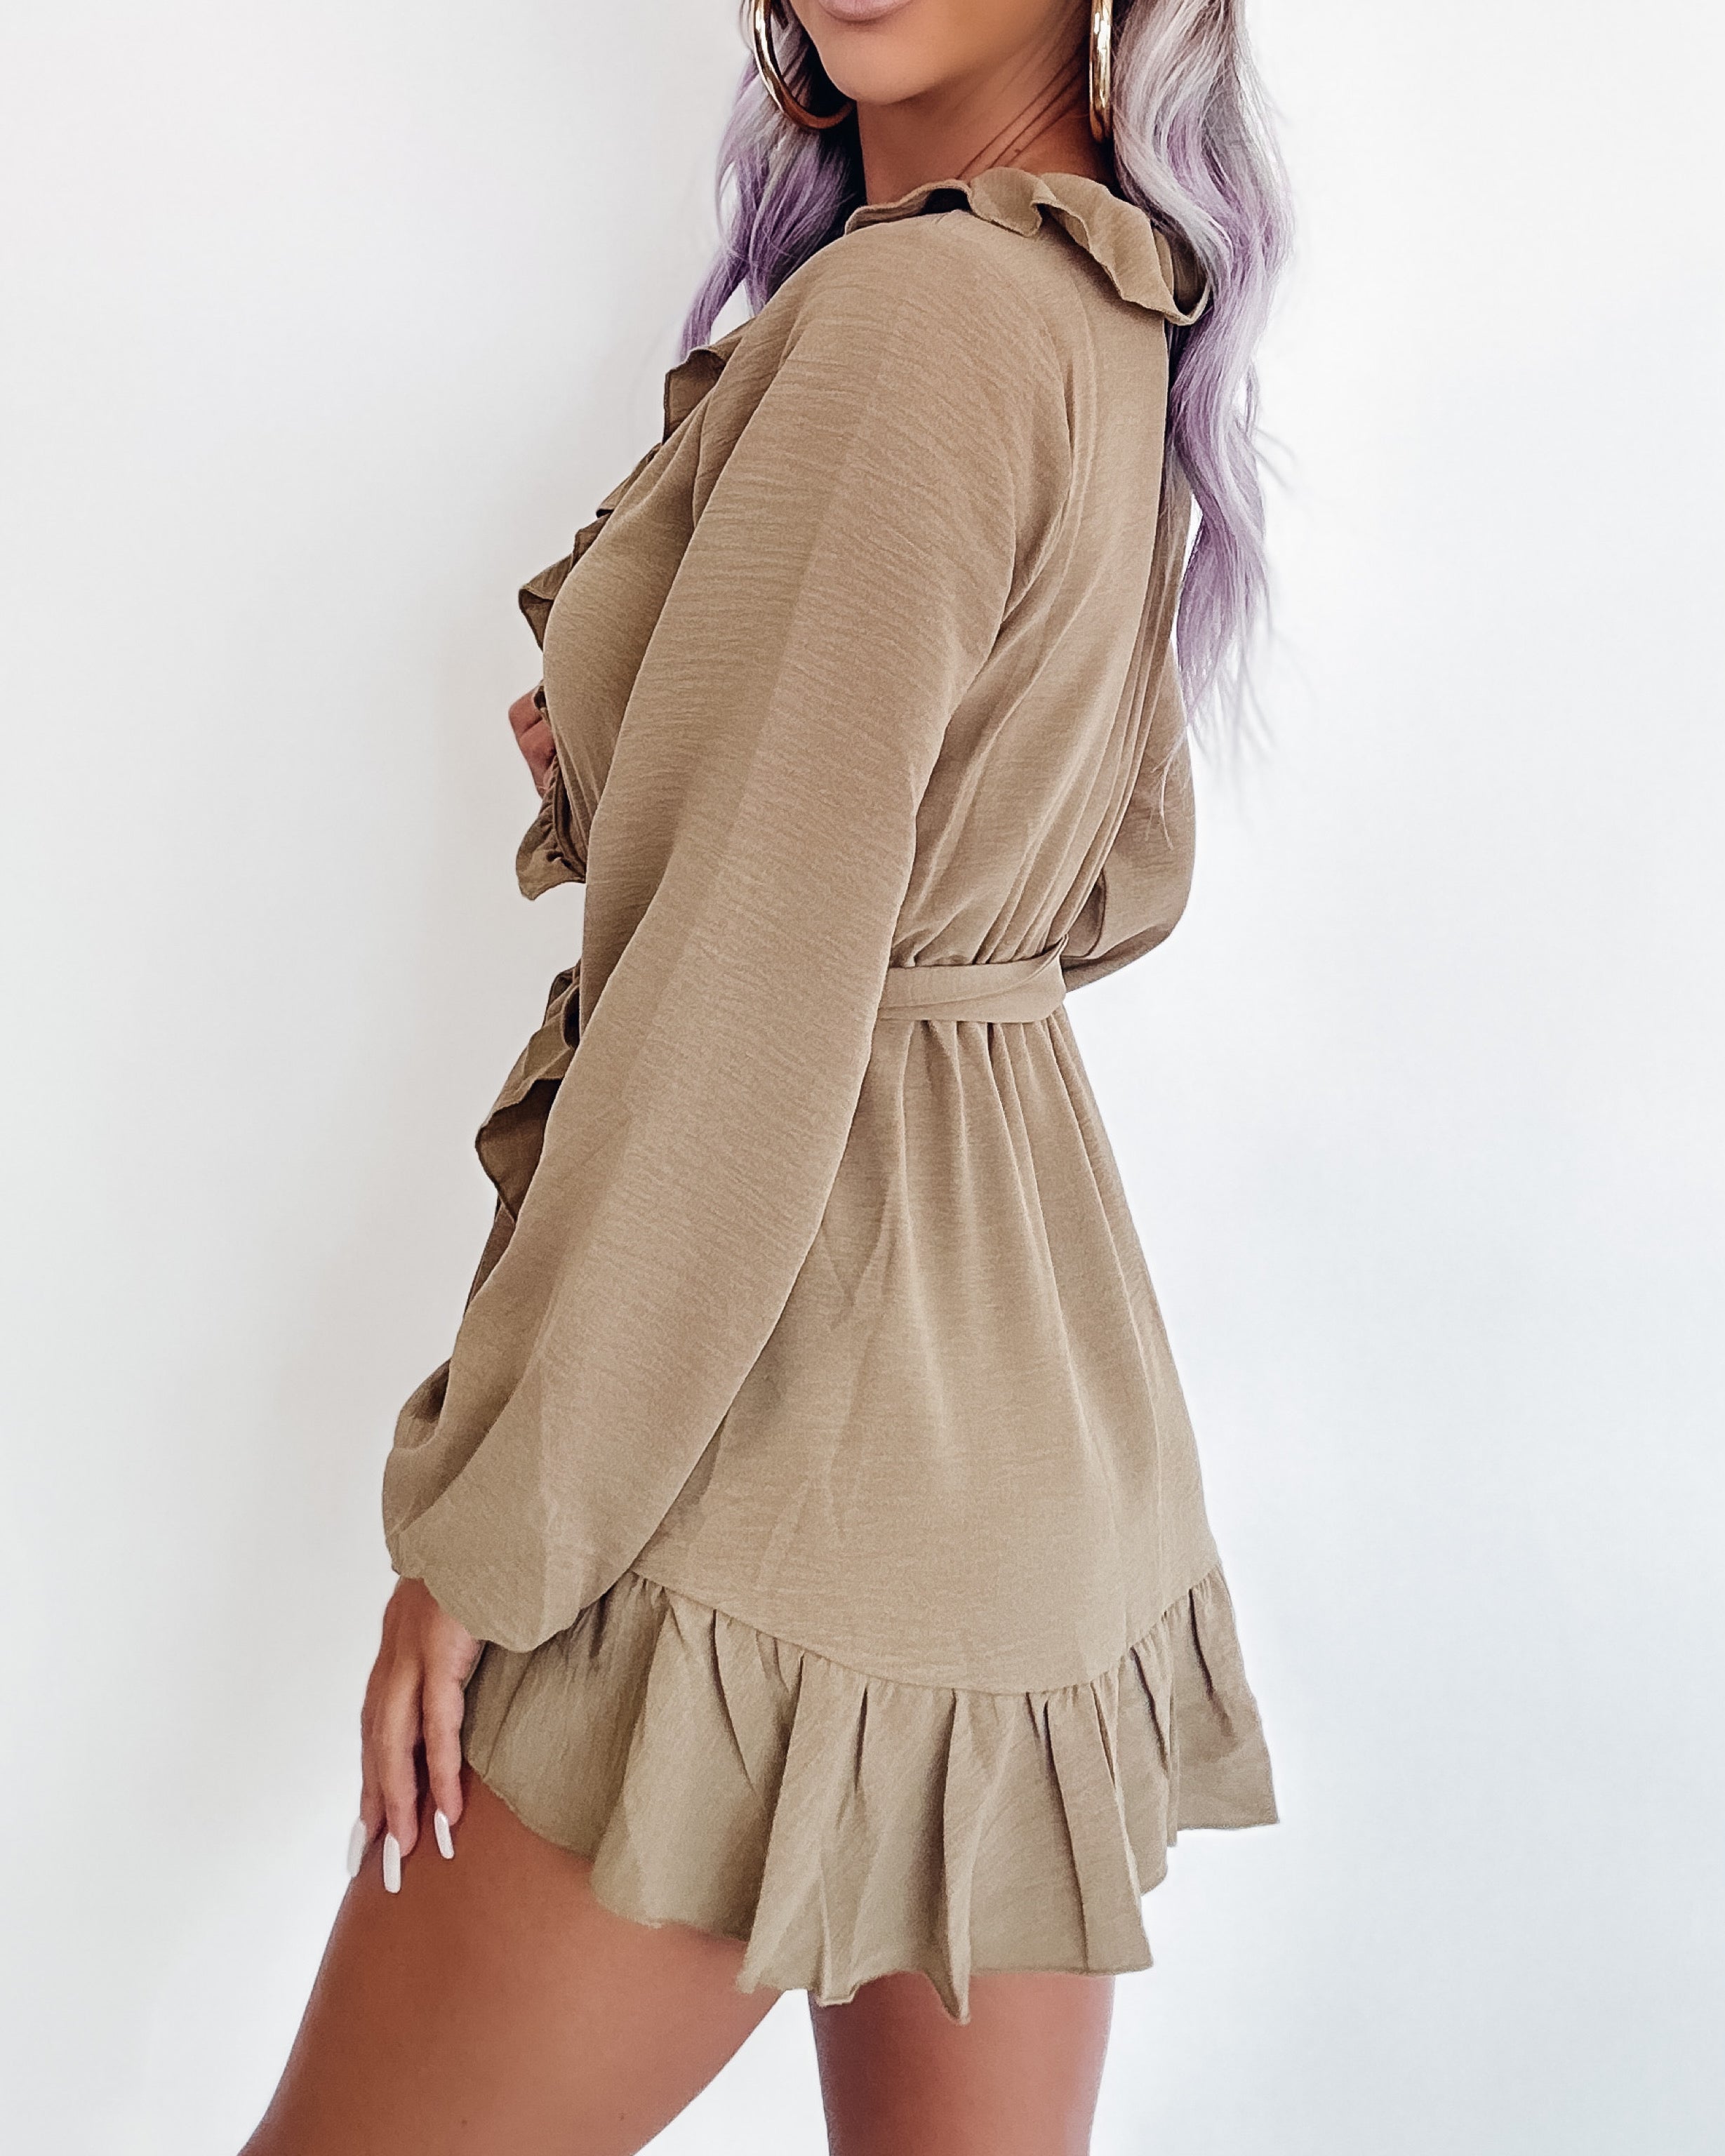 Unforgettable Ruffle Romper- Taupe